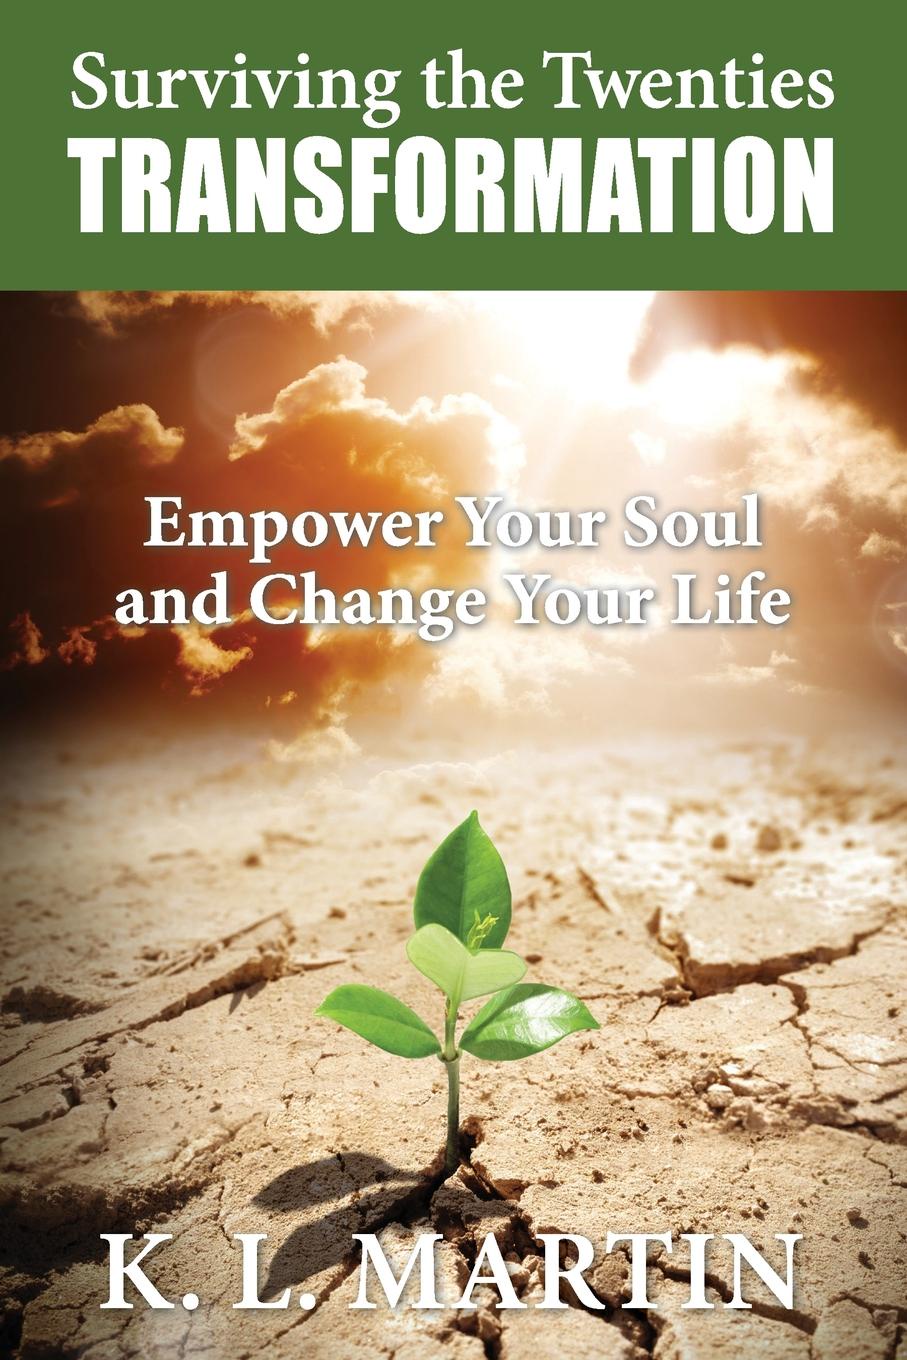 Surviving the Twenties Transformation. Empower Your Soul and Change Your Life